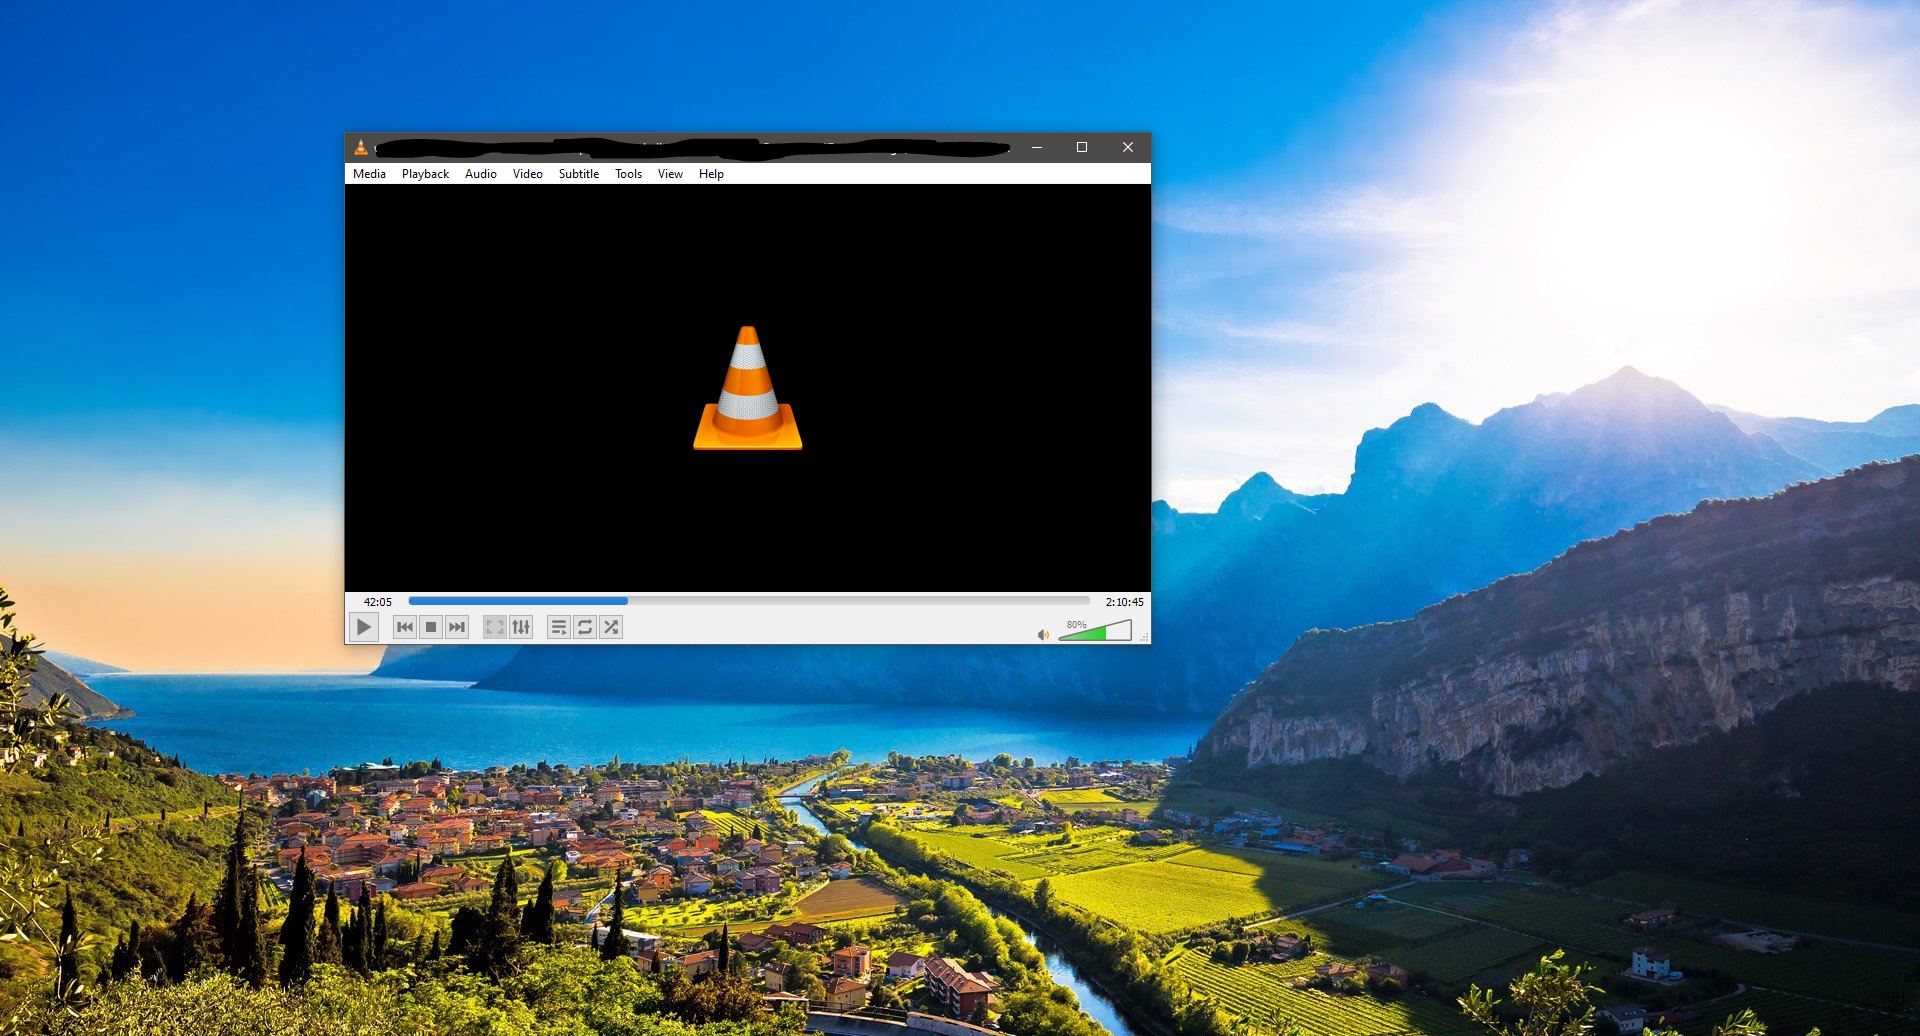 how to download hd videos from youtube using vlc 2019